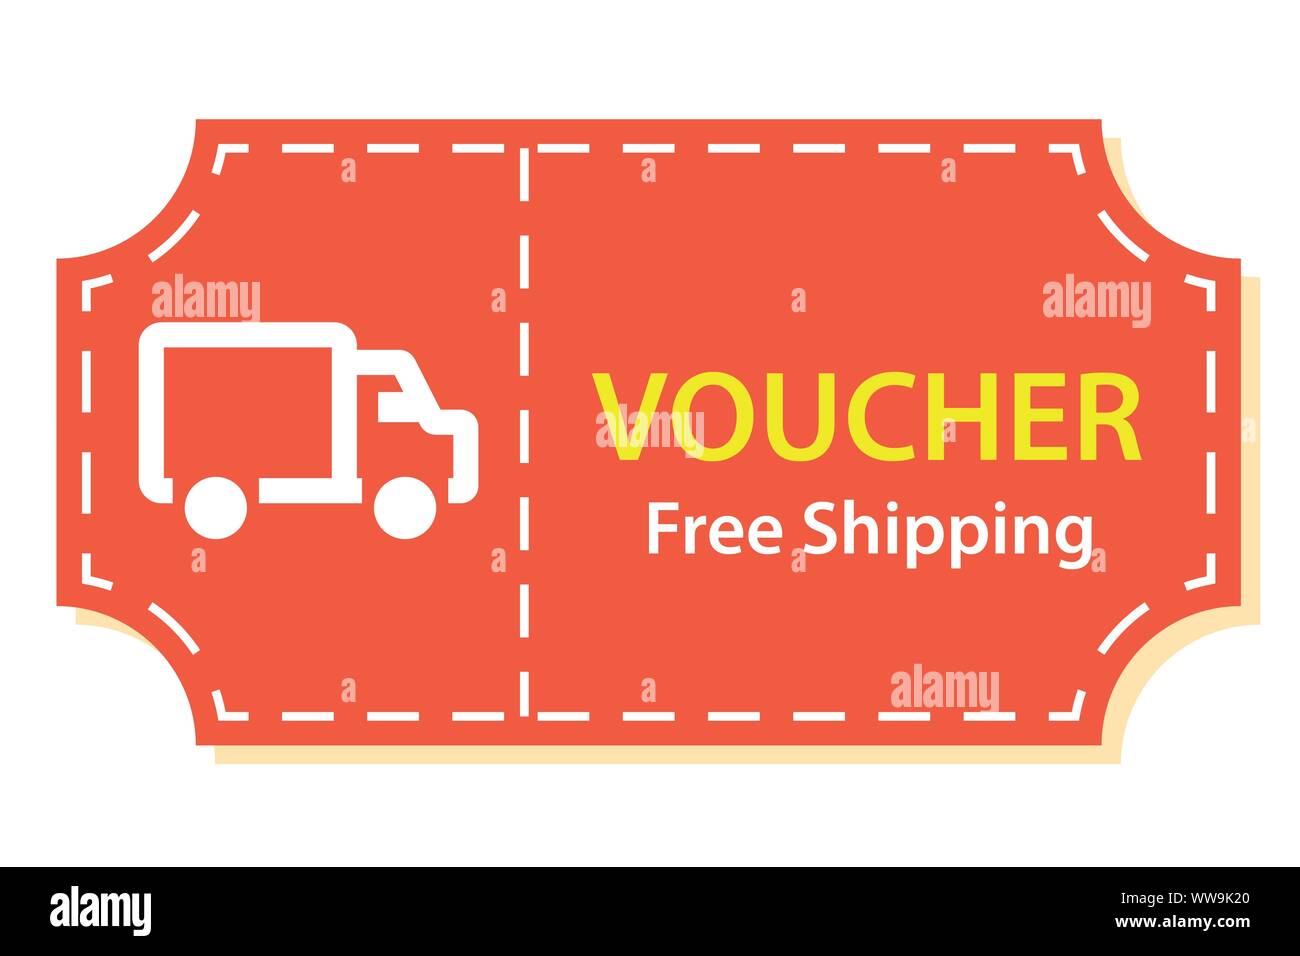 Smallwoods Free Shipping Voucher - wide 2